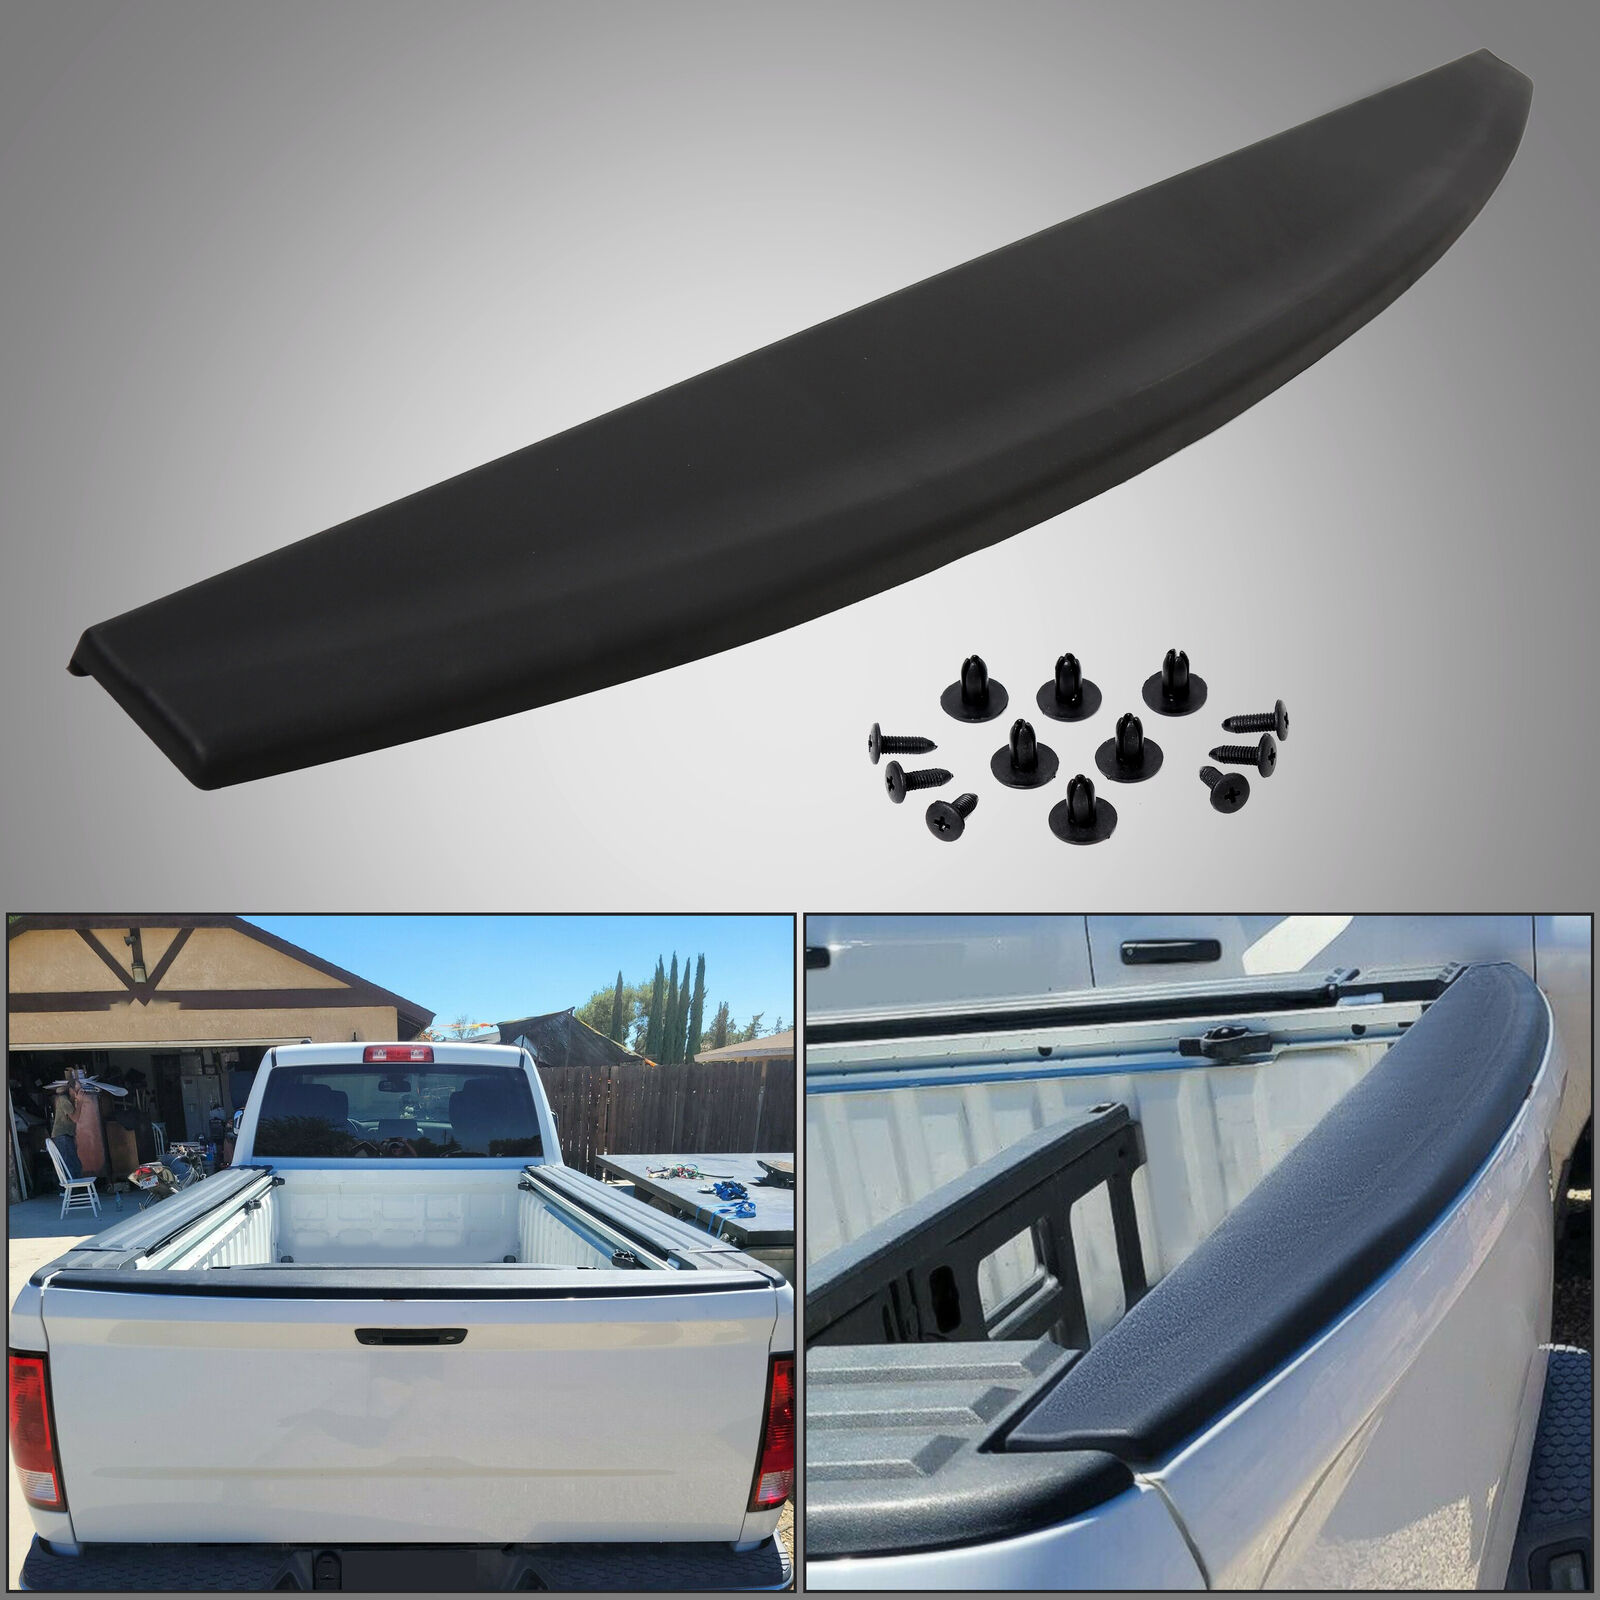 Tailgate Cover Mold Top Cap Protector Spoiler For Dodge Ram 1500 2500 3500 09-19